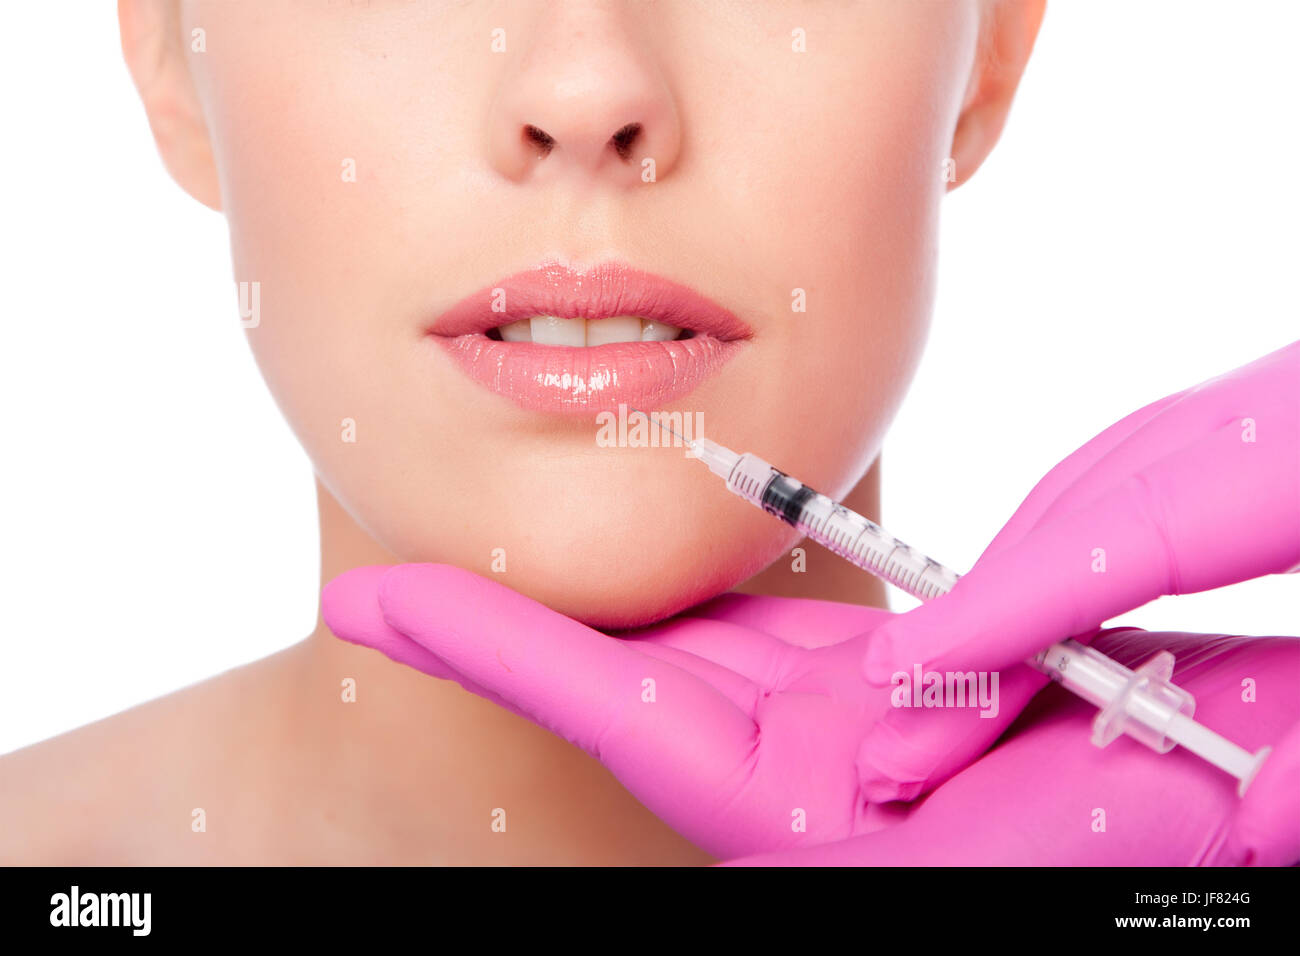 Beauty lip collagen filler injection Stock Photo